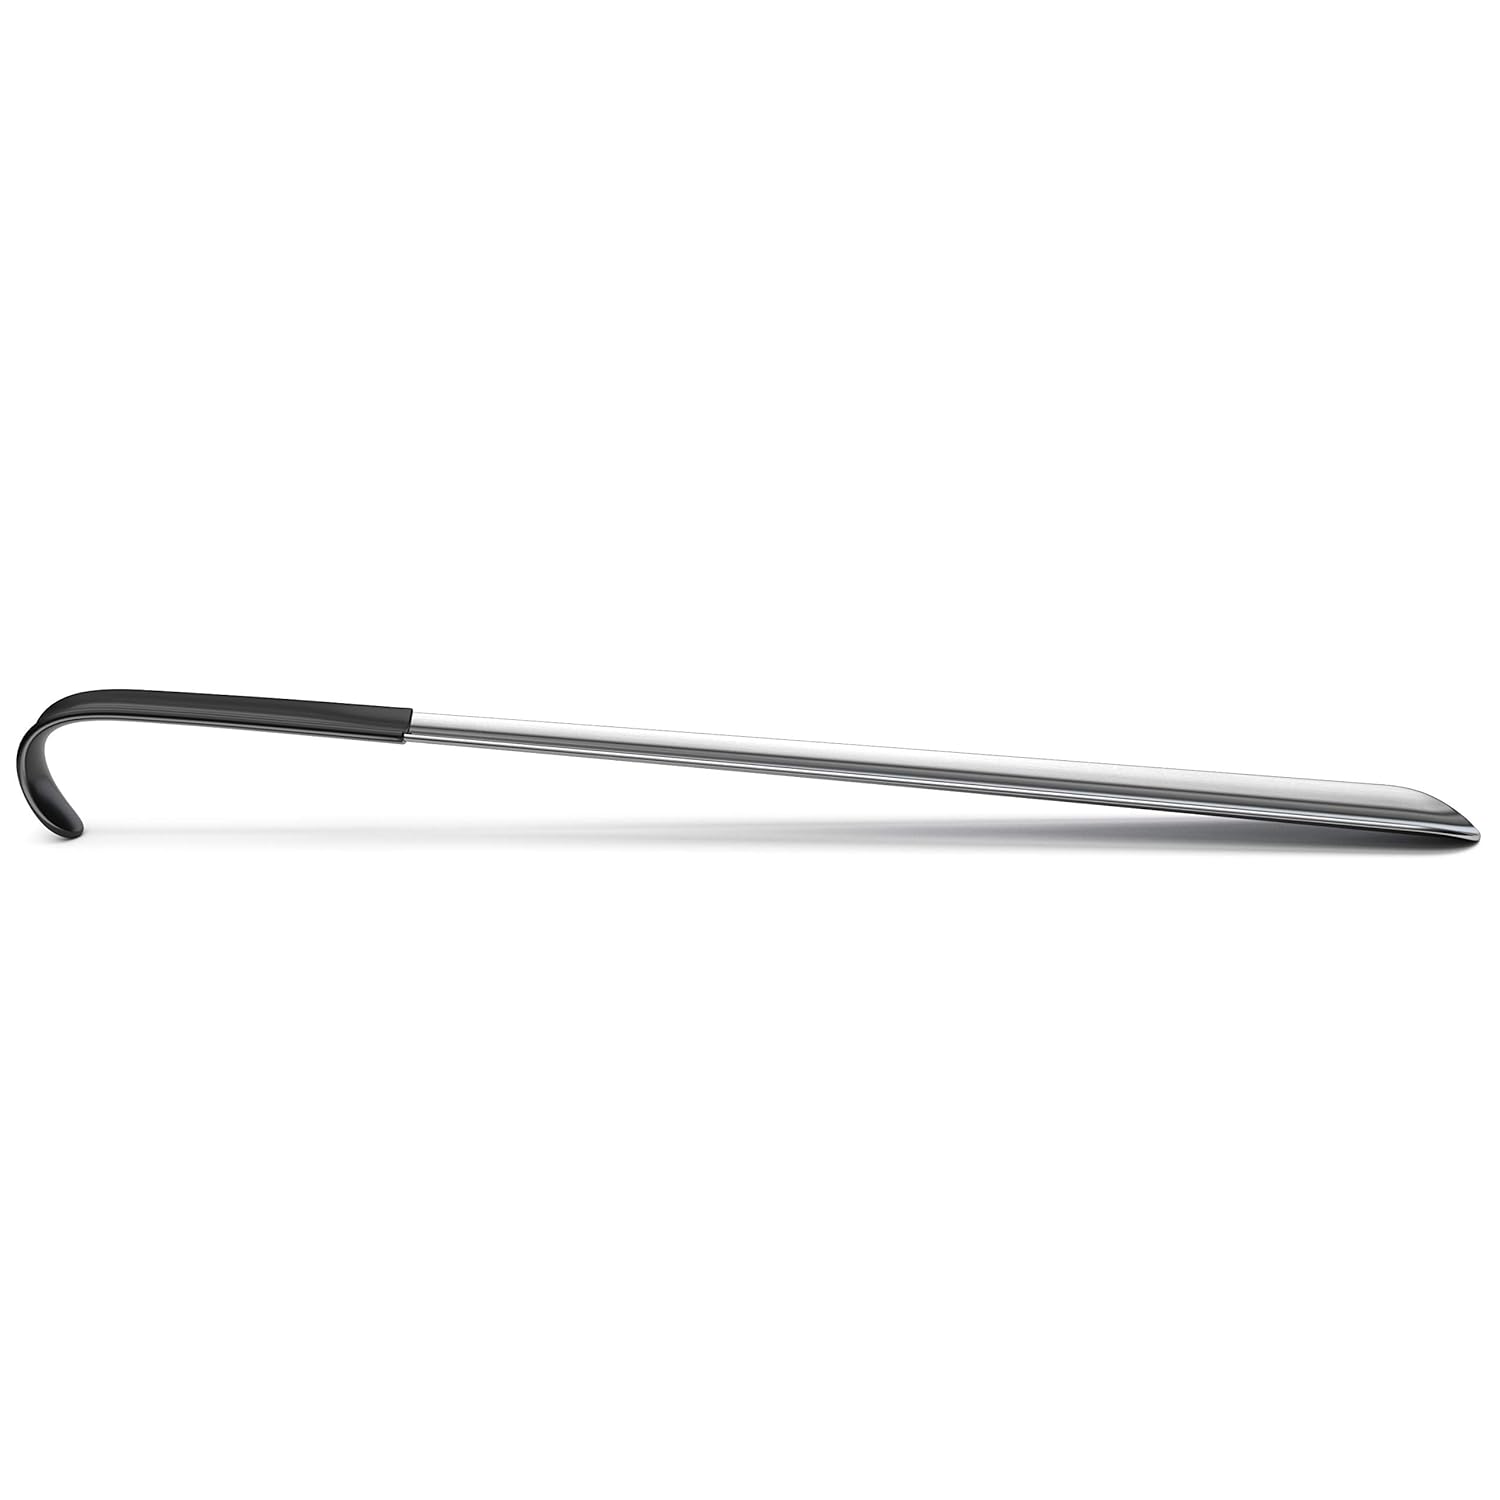 New 2019 Model with 1.8mm Thick Steel Will Not Bend HOUNDSBAY 16.5 Long Handled Metal Shoe Horn with Comfort Grip 